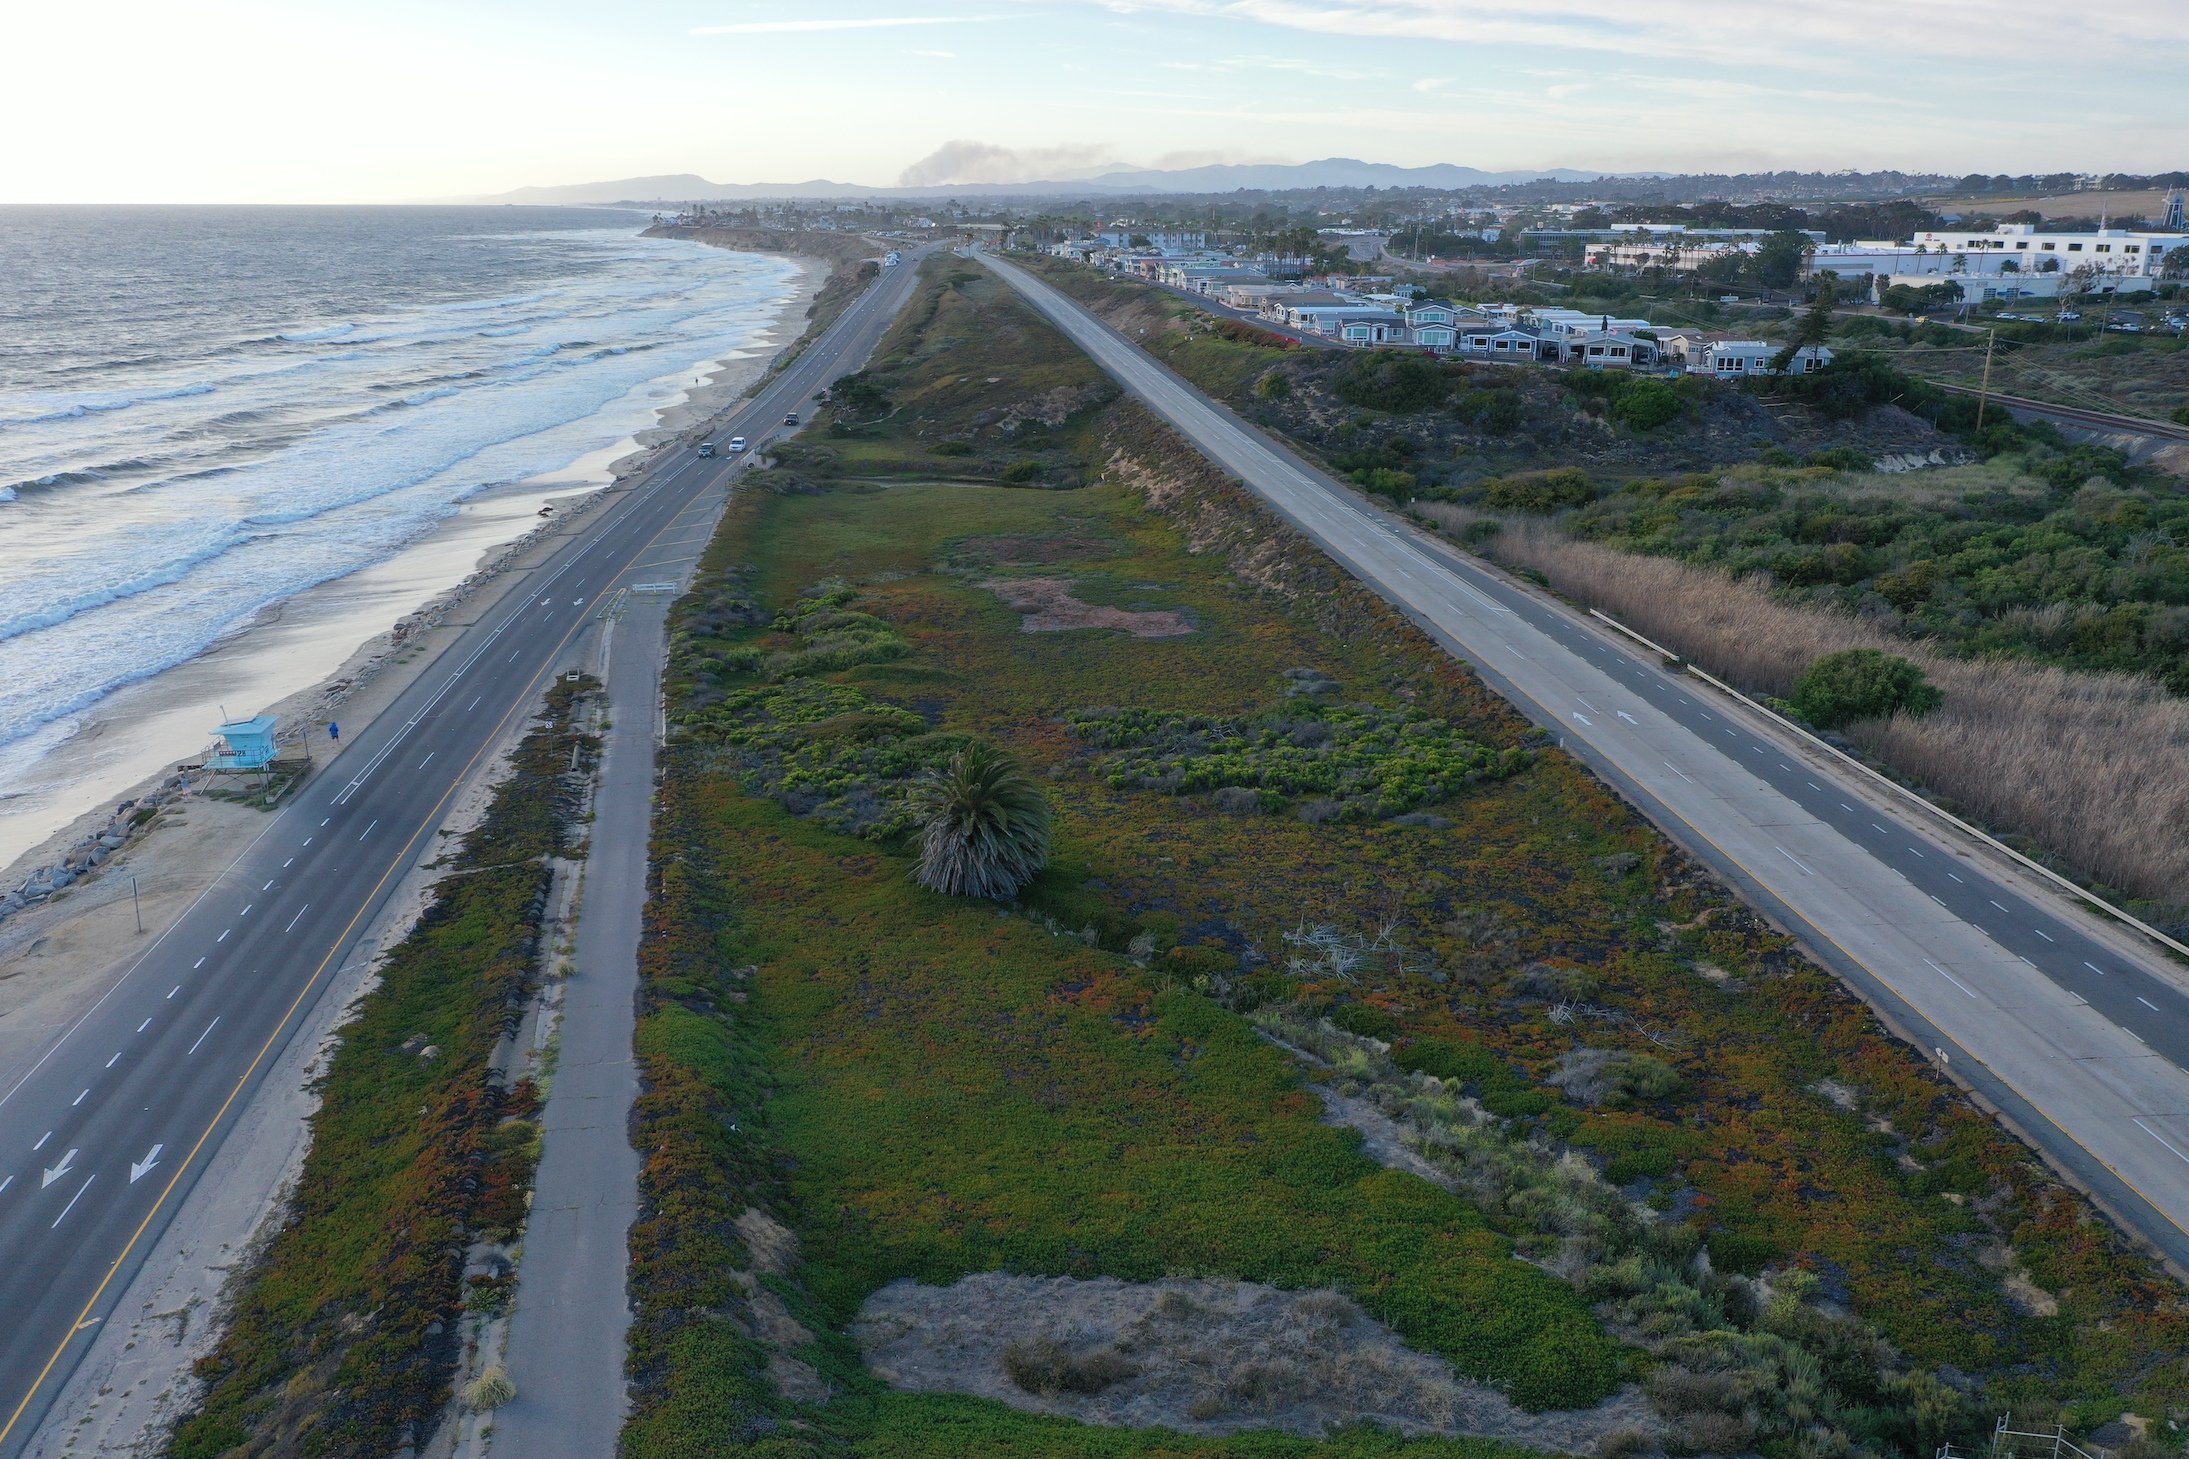 a drone image of the dip at Encinas Creek, showing the ocean encroaching on the southbound lane and a wide, undeveloped median between the south and northbound lanes.